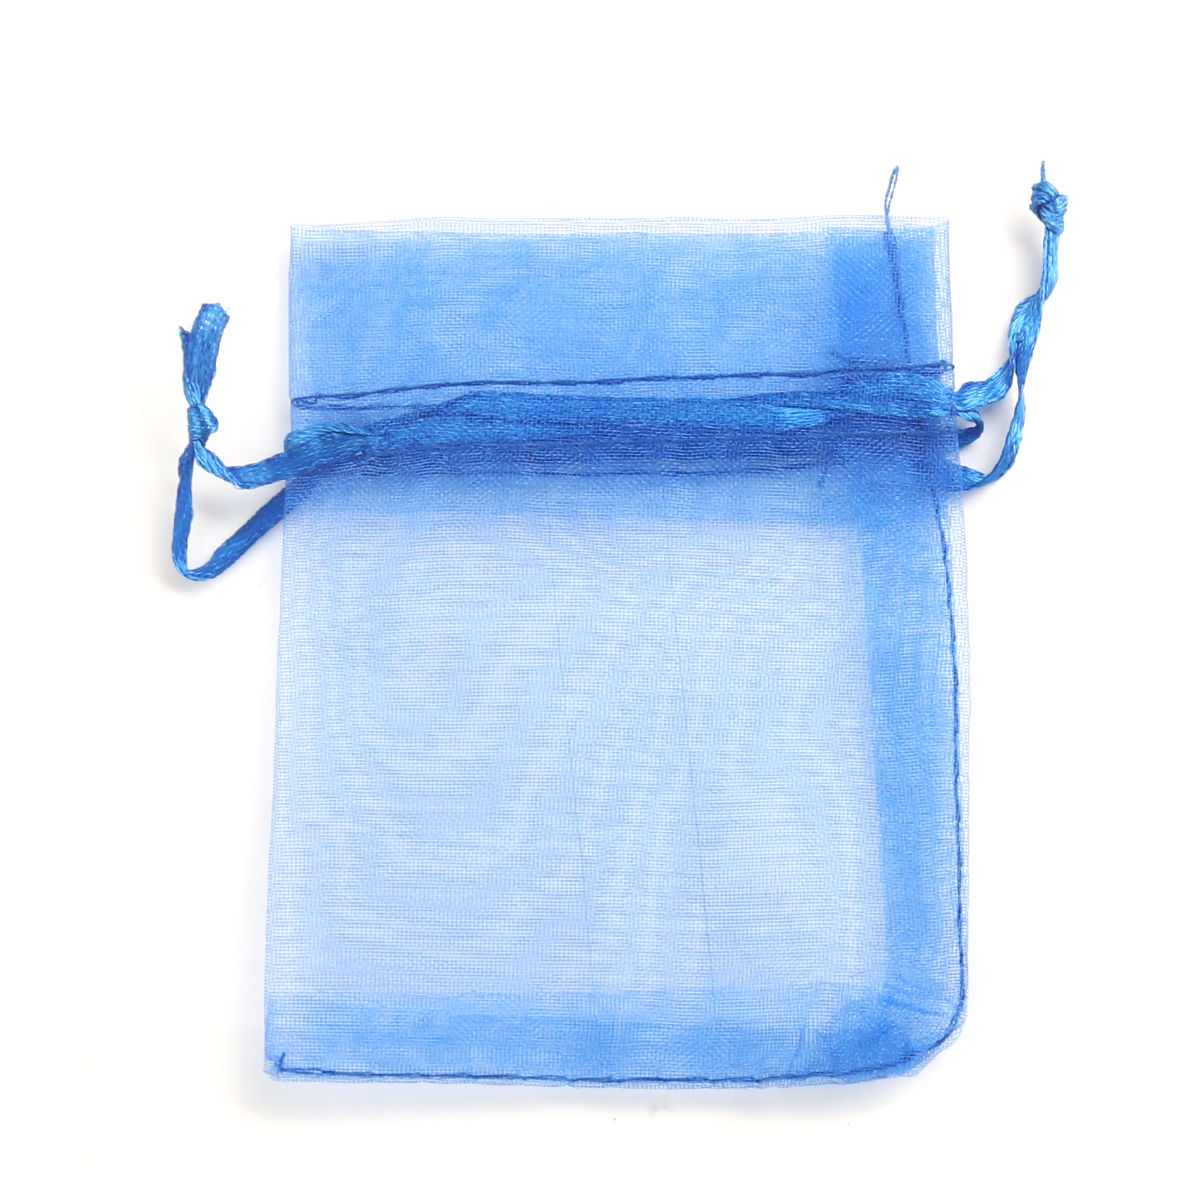 Picture of Wedding Gift Organza Jewelry Bags Drawstring Rectangle Royal Blue 10cm x8cm(3 7/8" x3 1/8"), (Usable Space: 8x8cm) 30 PCs